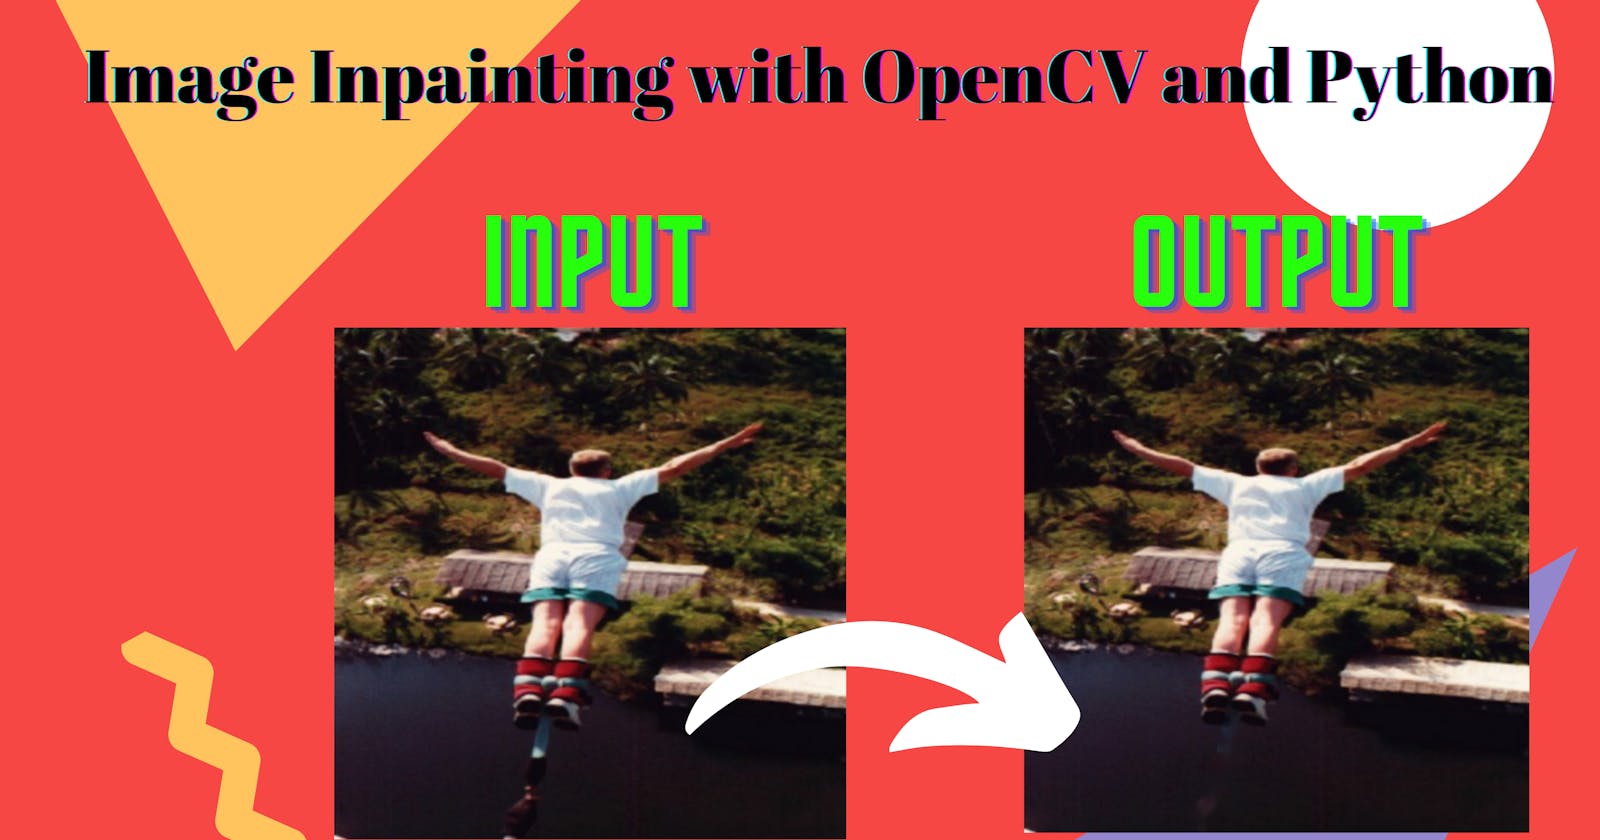 Image Inpainting with OpenCV and Python